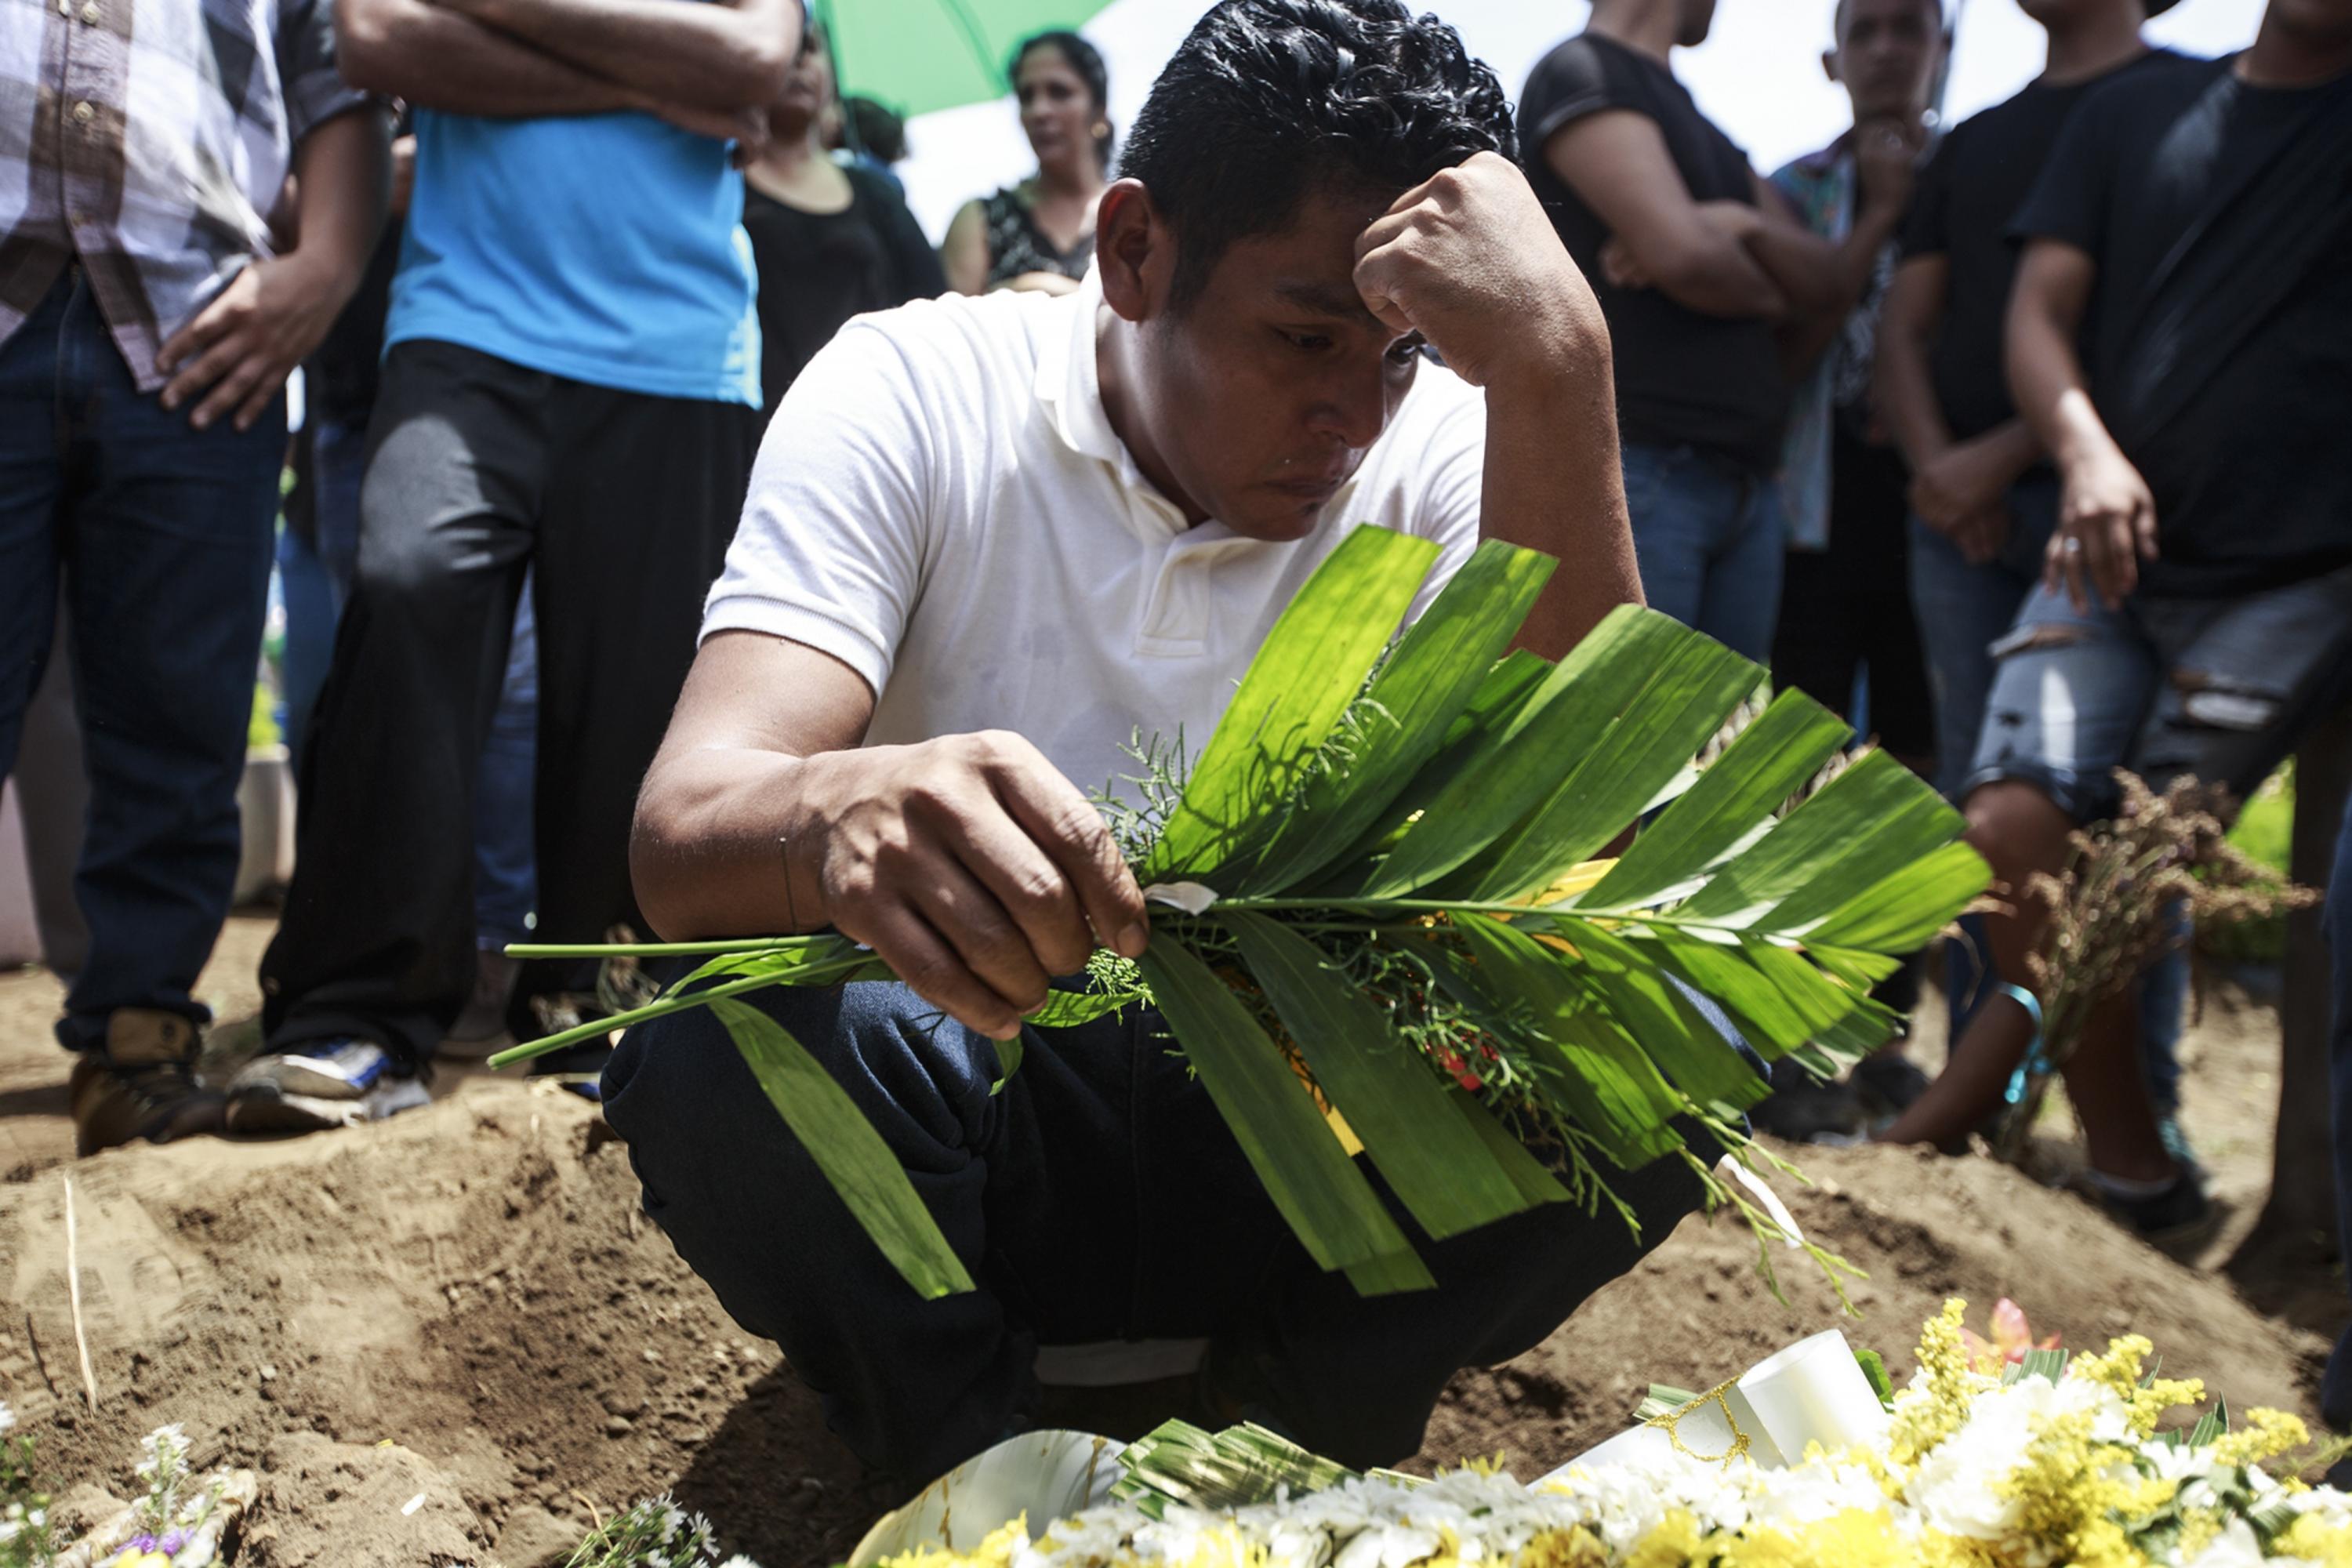 Nelson Gabriel Lorio during the funeral for his son Teyler Lorio on June 24, 2018. Nelson was carrying his son in his arms when the child was shot. Photo Fred Ramos